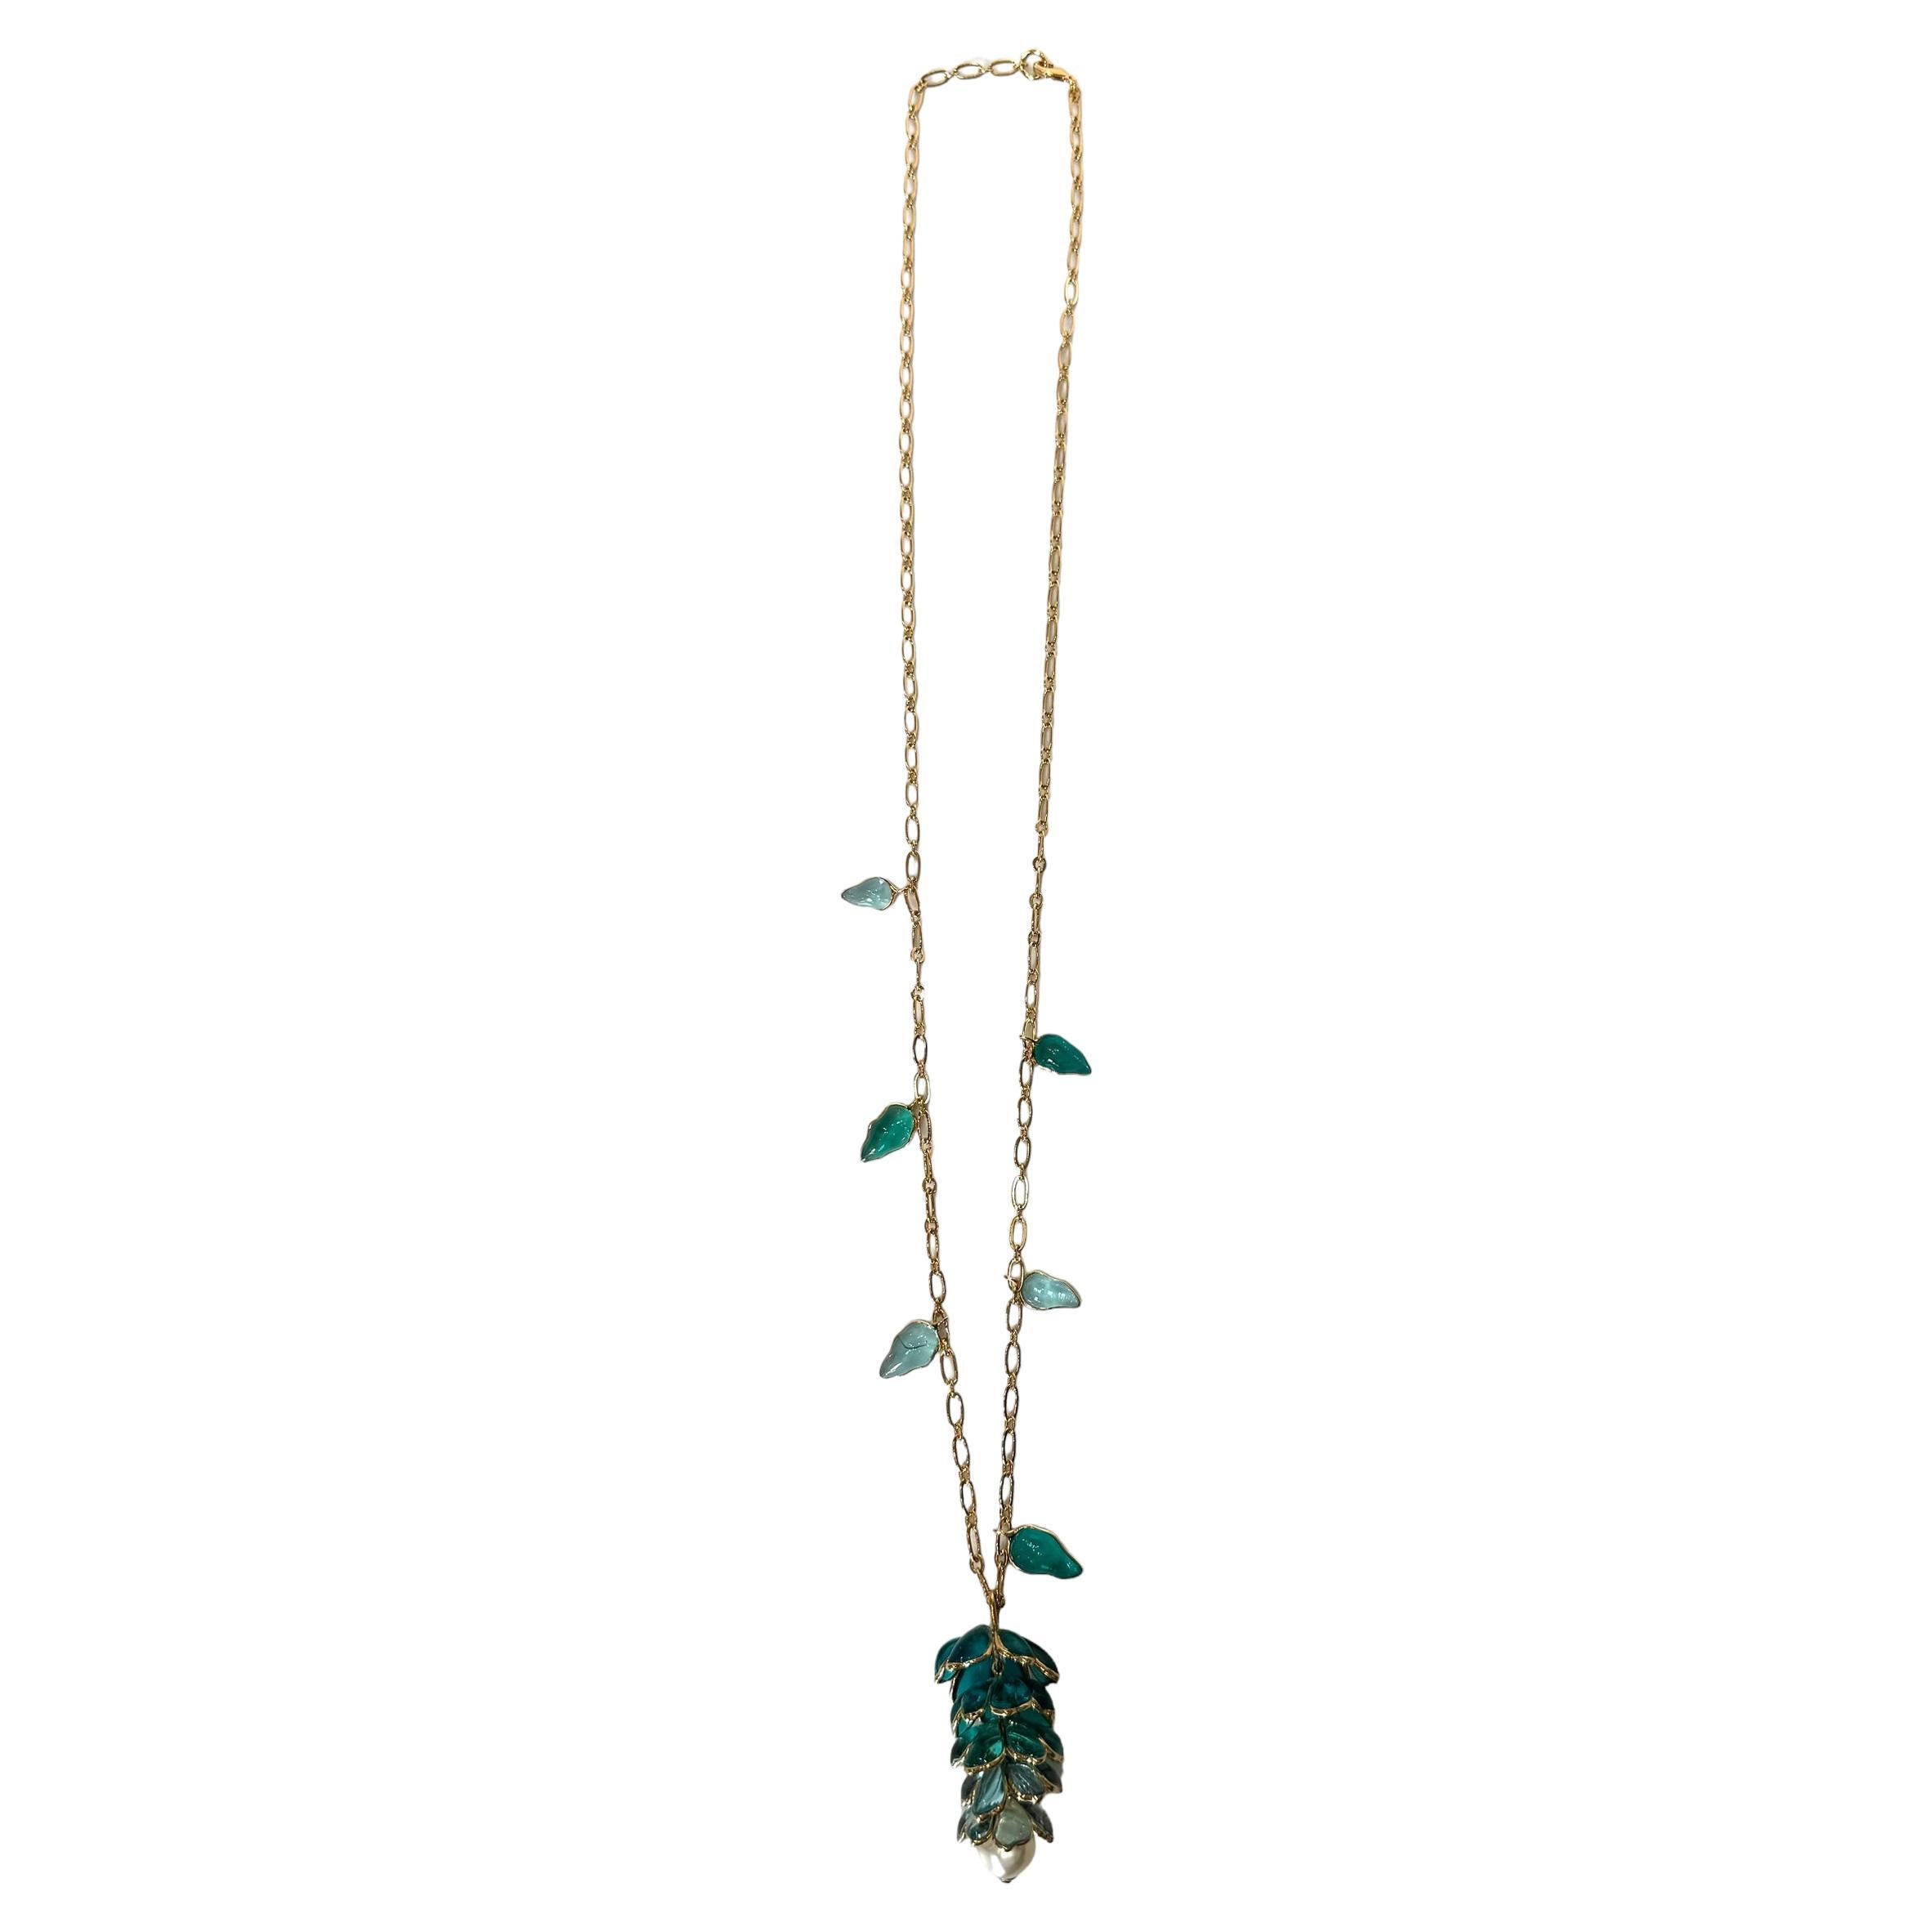  Sea Life Meduse Long Necklace with pearl

Materials : poured glass, gold (24k) plated brass
Size : Total length: 90cm
Handmade in our Parisian workshop

Gripoix Paris – costume jewellery taken to the exquisite; the ancestral art of pate de verre